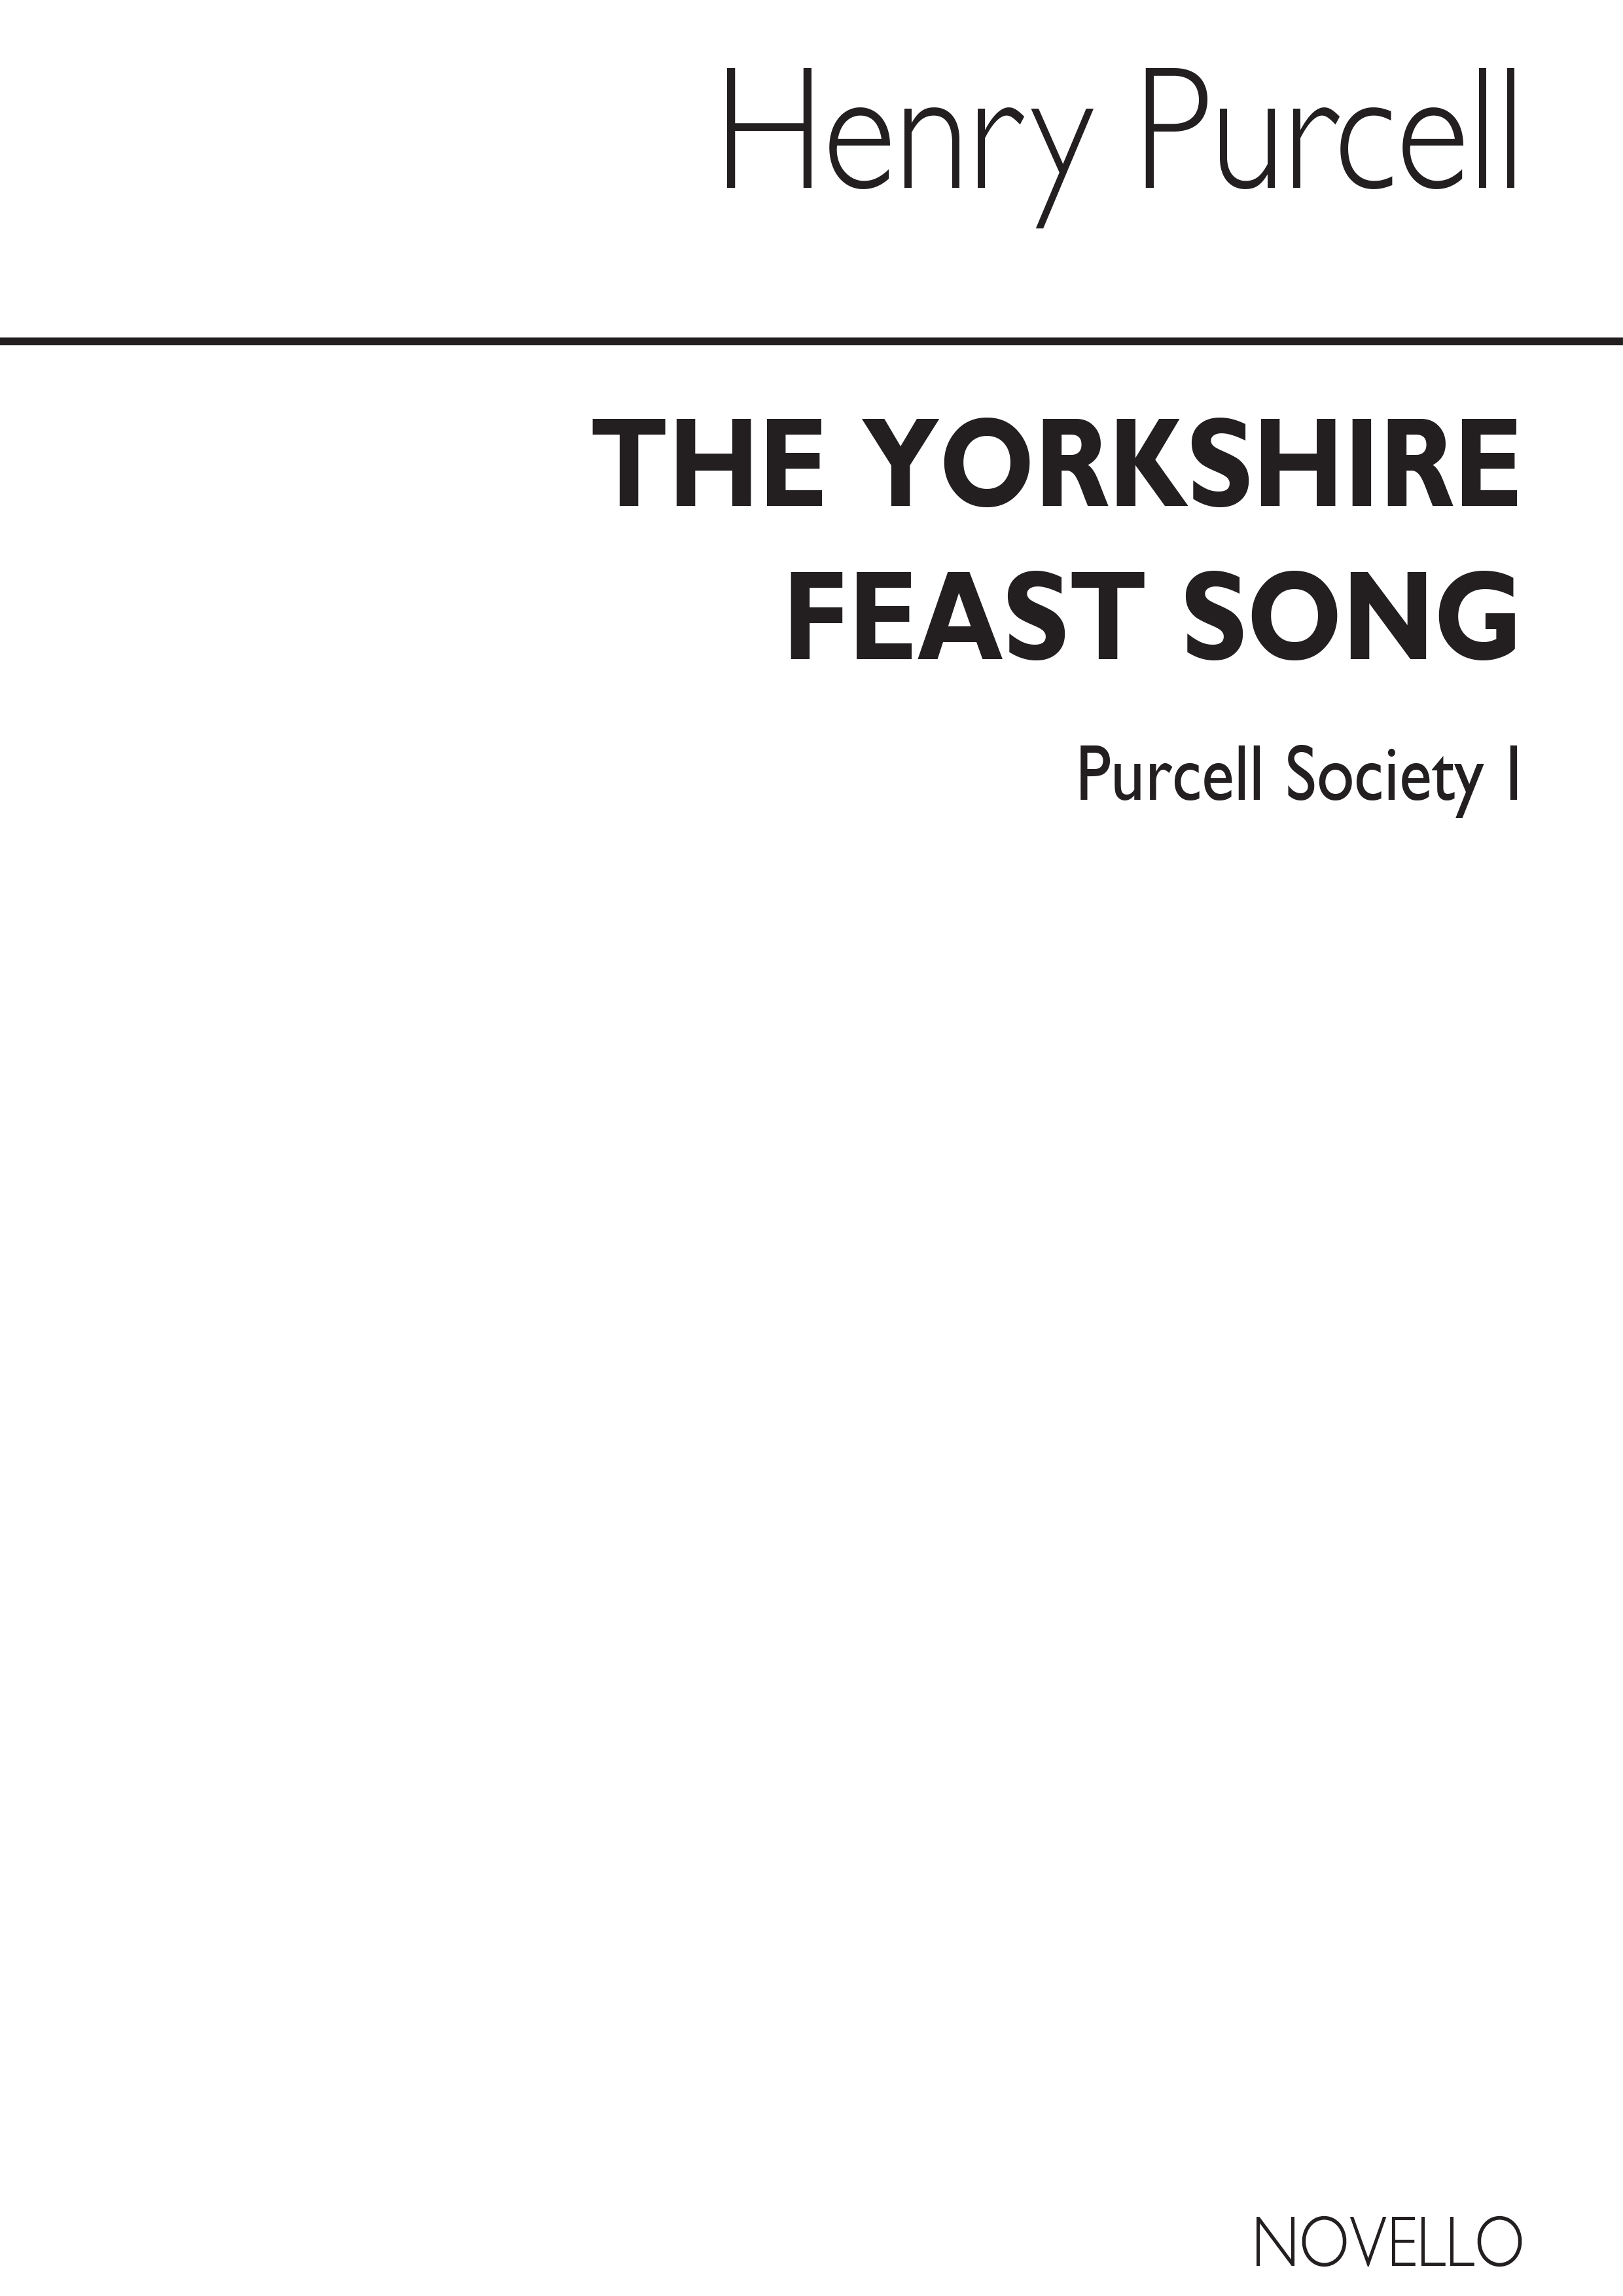 Purcell Society Volume 1 - The Yorkshire Feast Song (Full Score - Original Engra